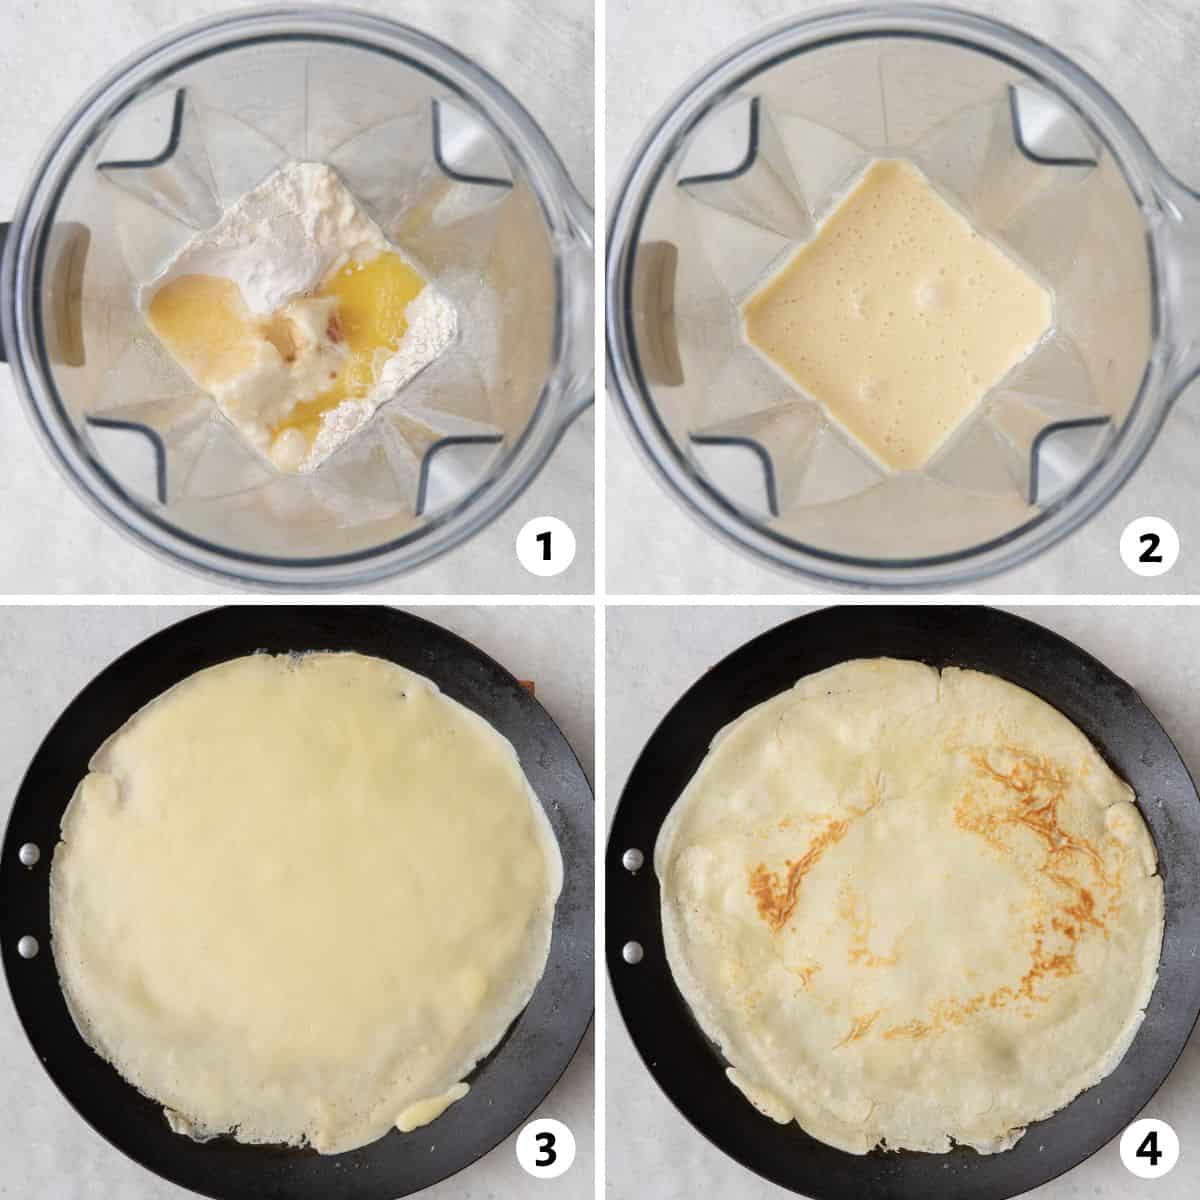 4 image collage preparing and cooking recipe: ingredients in blender, after mixed, batter in pan cooking, crepe after flipping.